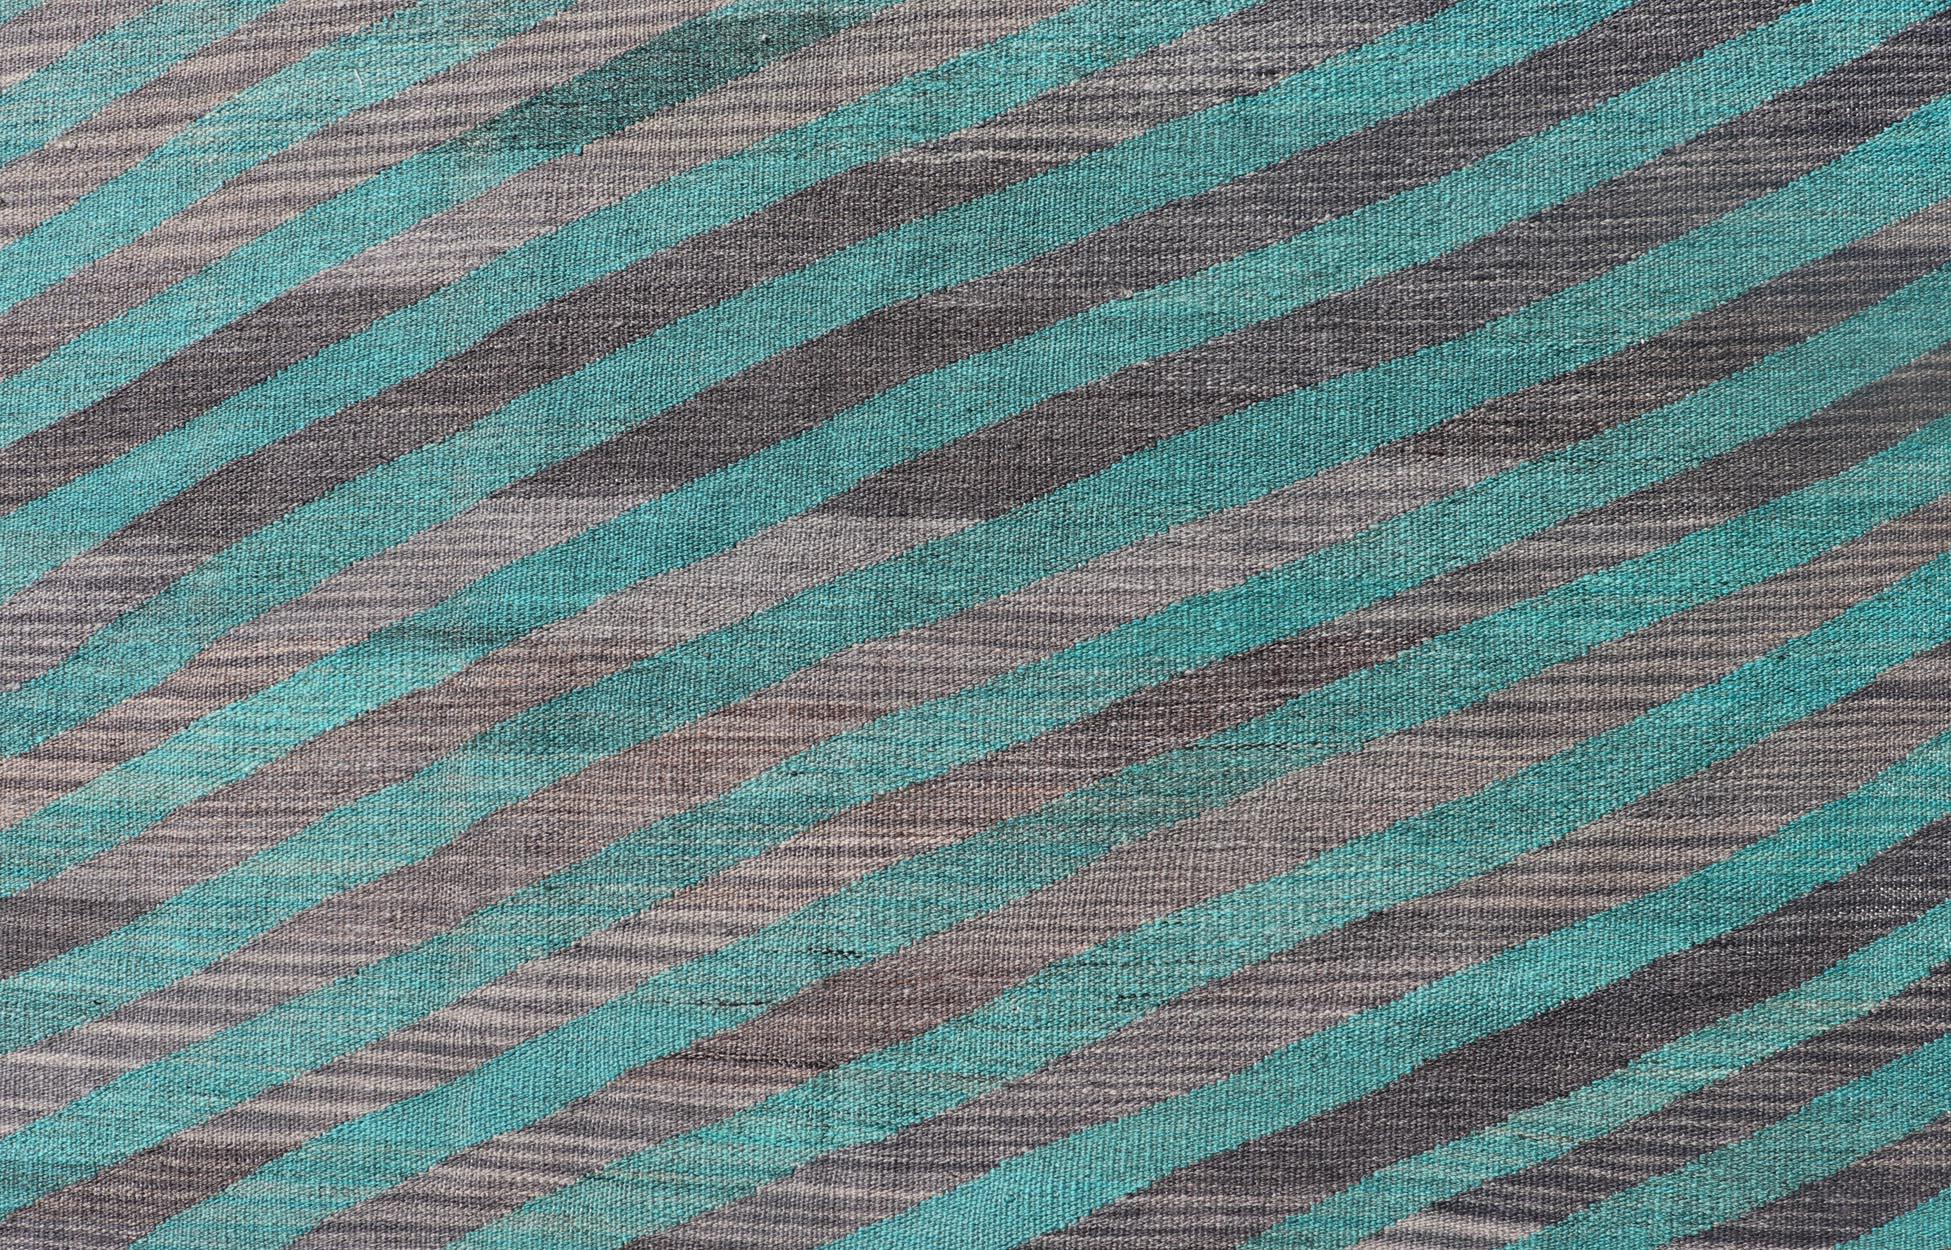 This flat-weave Kilim has been hand-woven. The rug features a modern slanted stripe design, rendered in green and shades of gray; making this rug a superb fit for a variety of Classic, modern, casual and Minimalist interiors.

Modern Kilim Rug,